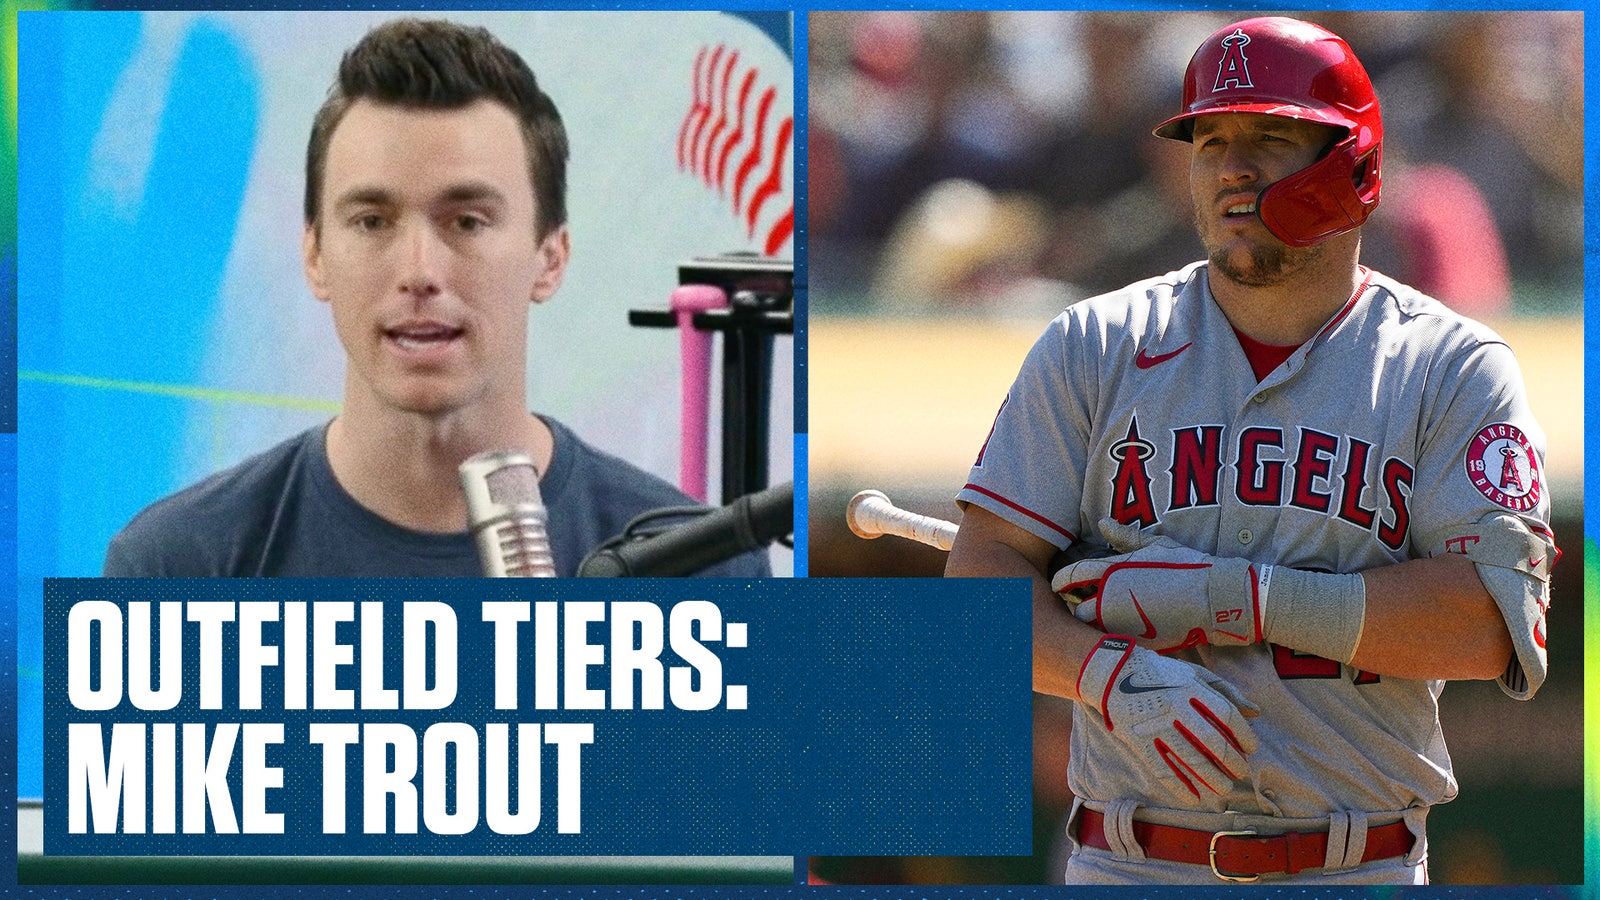 Mike Trout is so good that he gets his own tier among outfielders